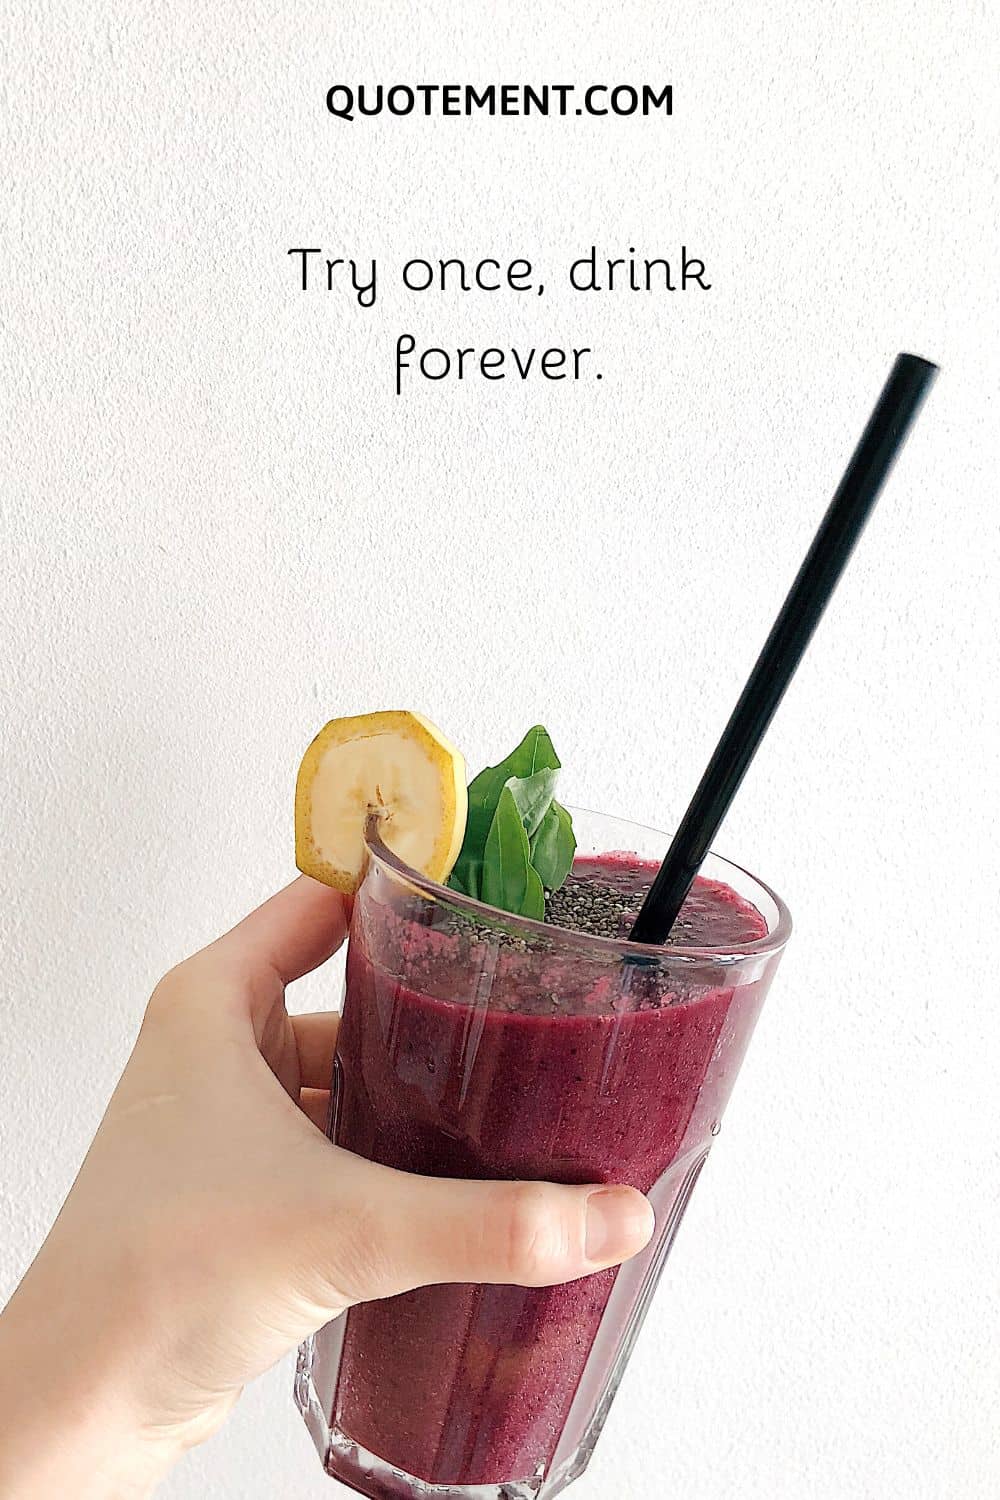 Try once, drink forever.